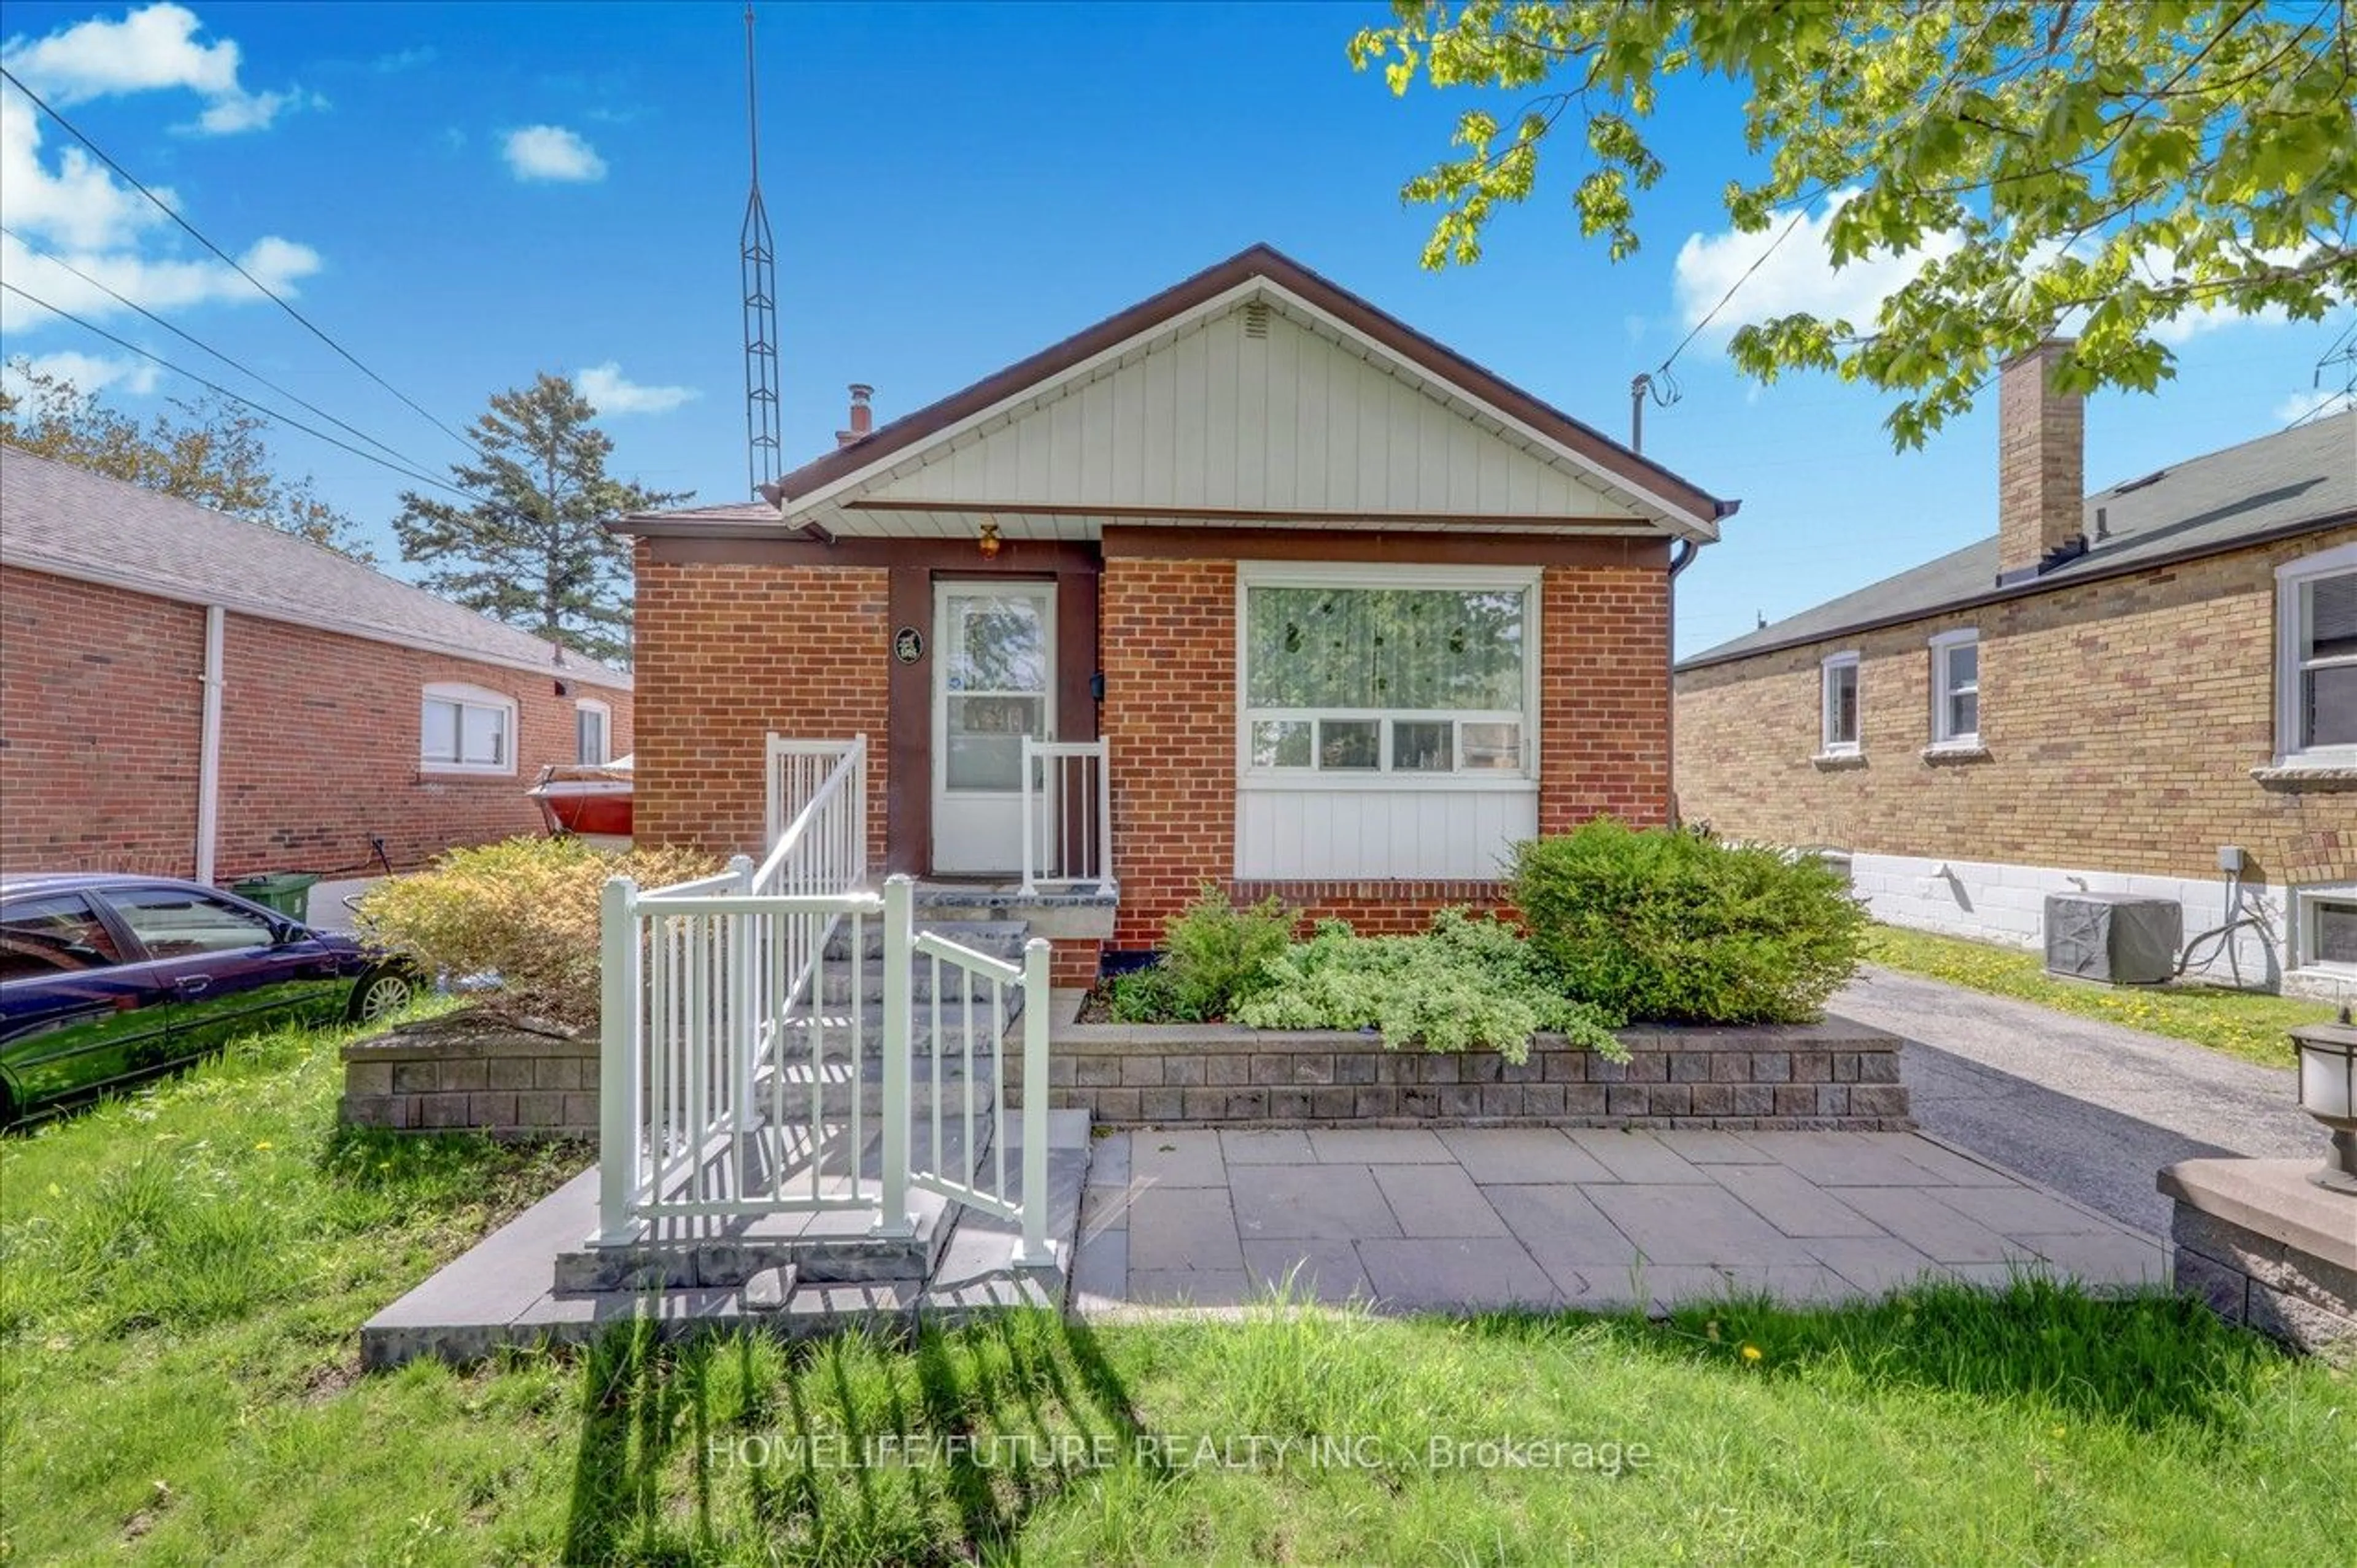 Home with brick exterior material for 98 Marble Arch Cres, Toronto Ontario M1R 1W9